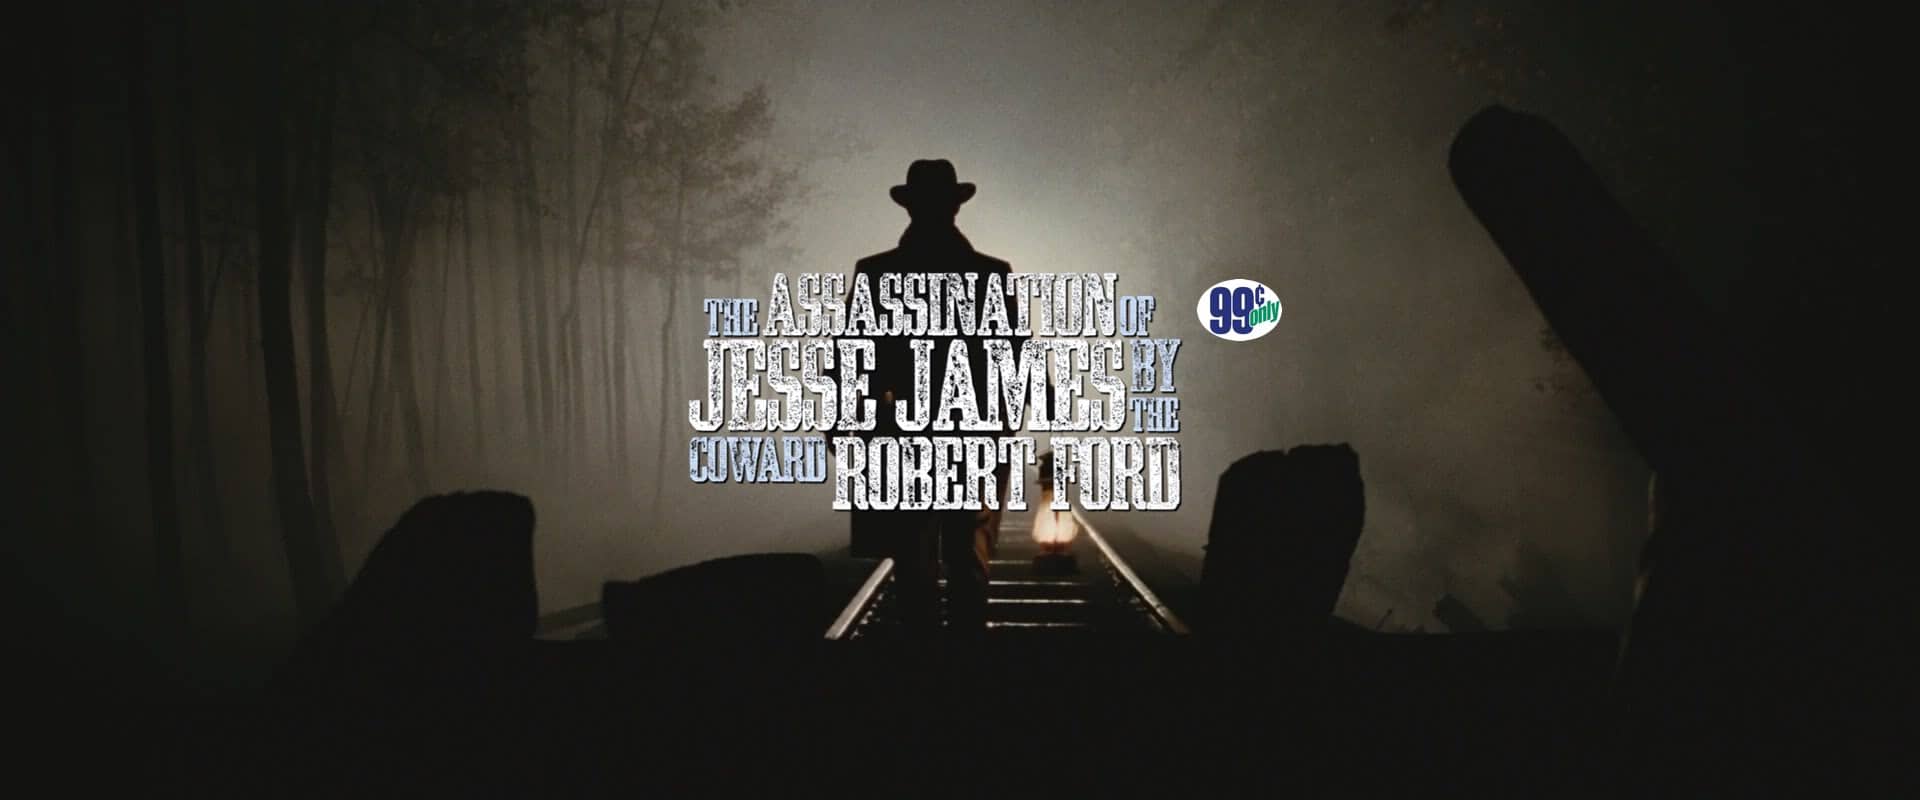 The (other) itunes $0. 99 movie of the week: ‘the assassination of jesse james by the coward robert ford’